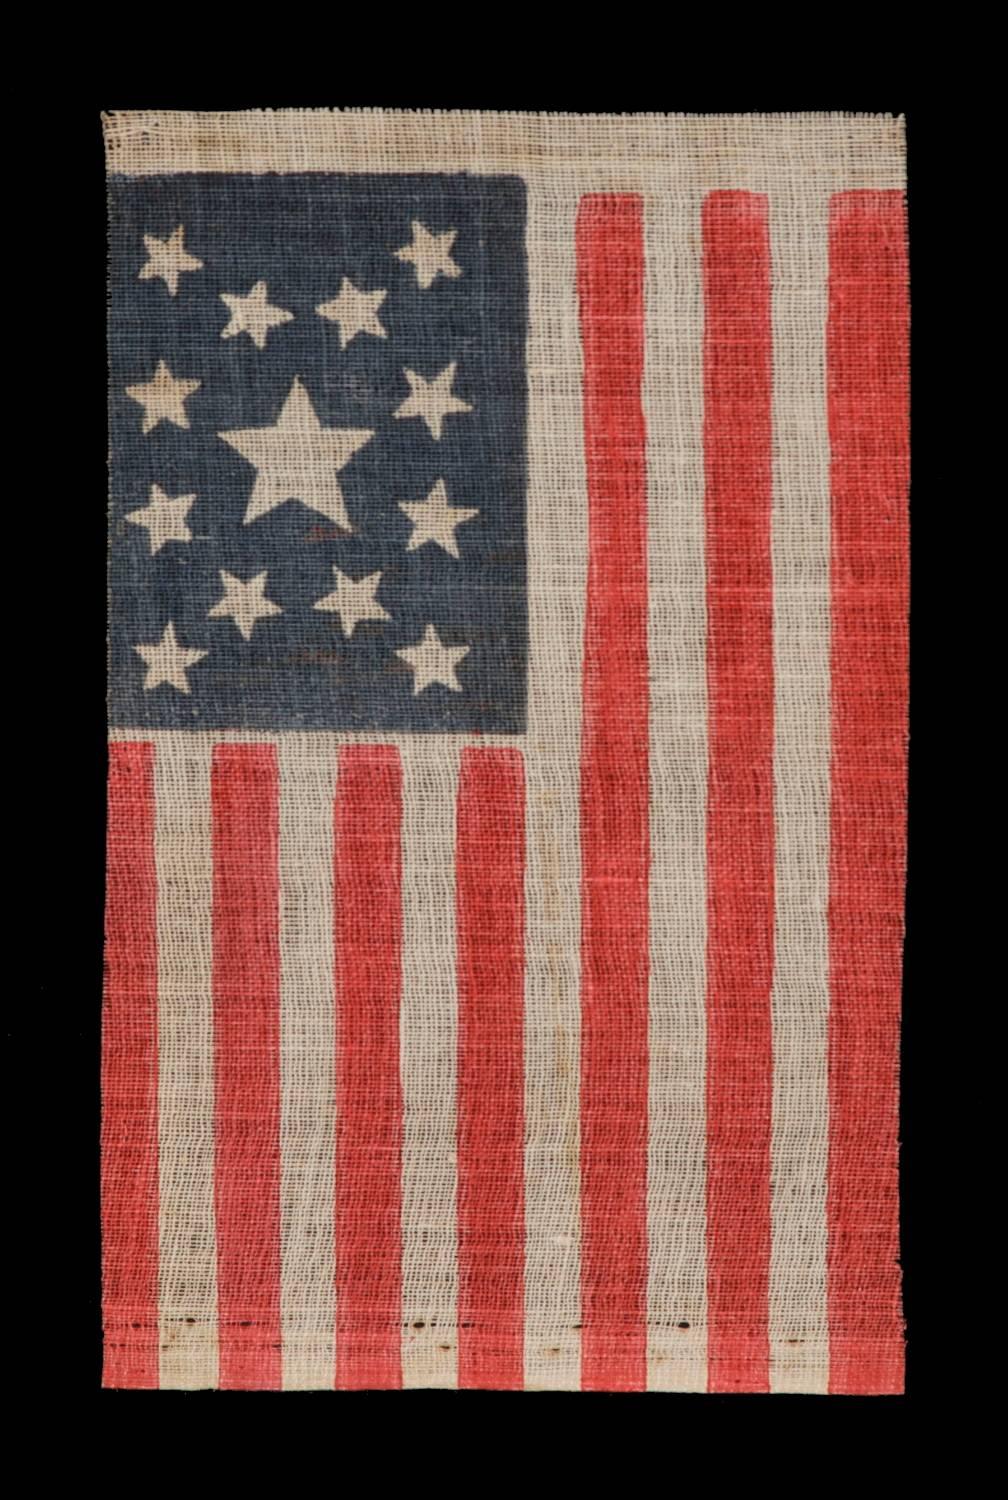 13 star American national parade flag, printed on coarse, glazed cotton, made for the 1876 celebration of our nation’s 100-year anniversary of independence. The stars are arranged in a medallion that consists of a star in the very center, surrounded